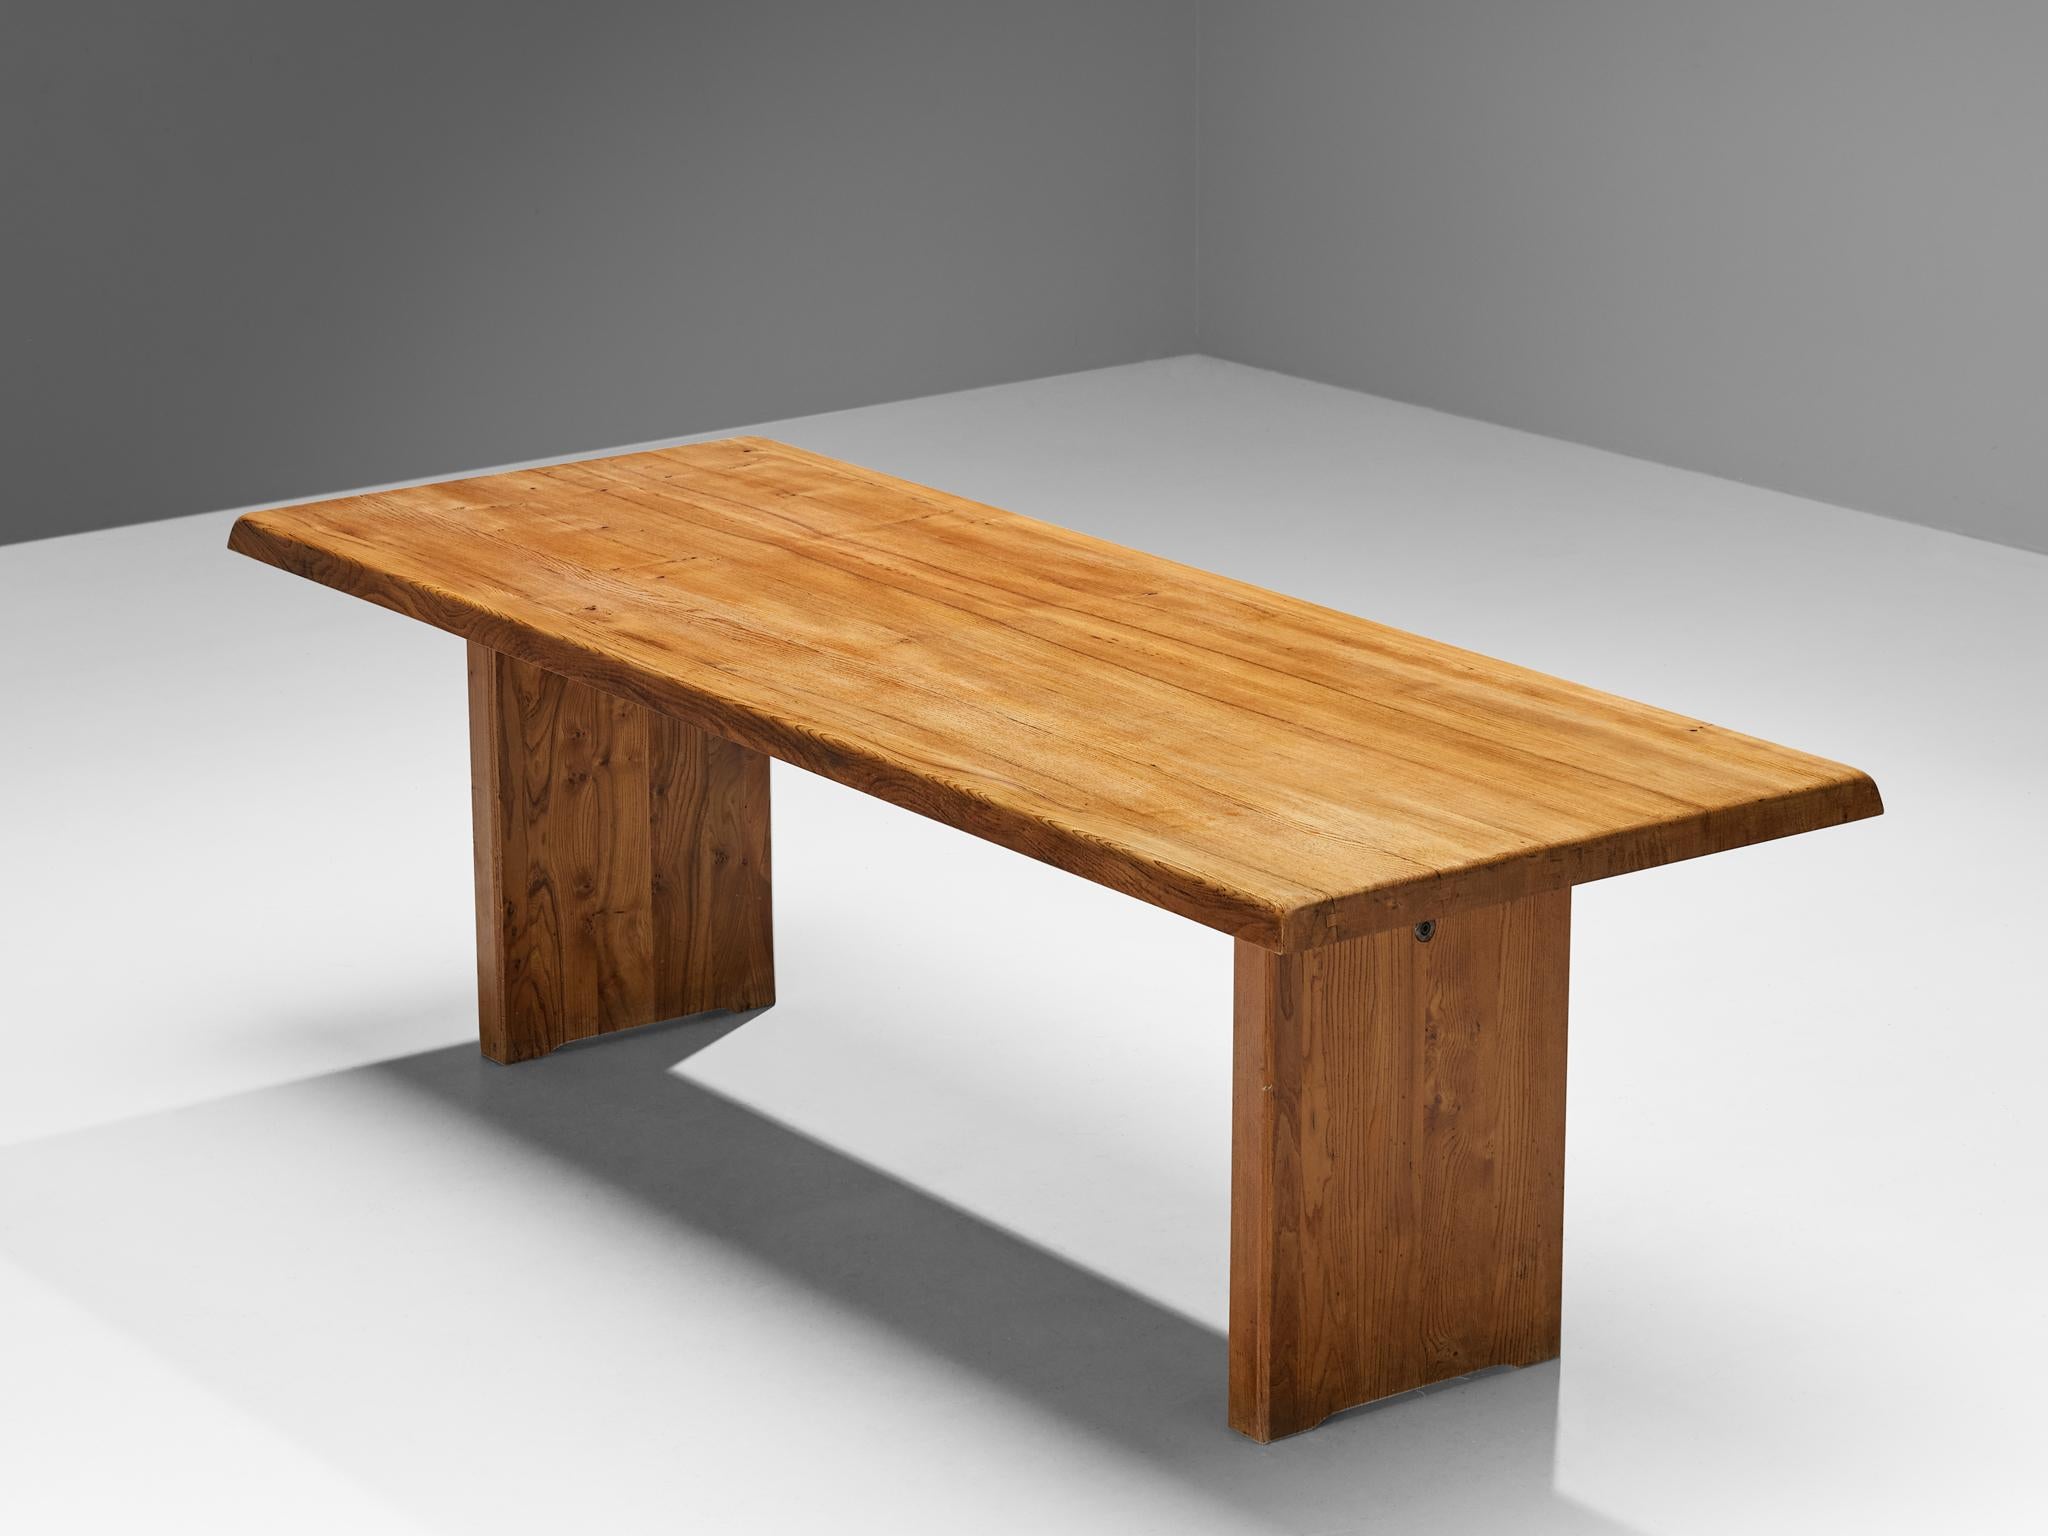 Early Pierre Chapo, dining table, model 'T14D', elm, France, 1960s

This dining table is designed by the French designer Pierre Chapo. The rectangular tabletop with sloping edges, and rests on a two-legged base. Strong and simplified design which